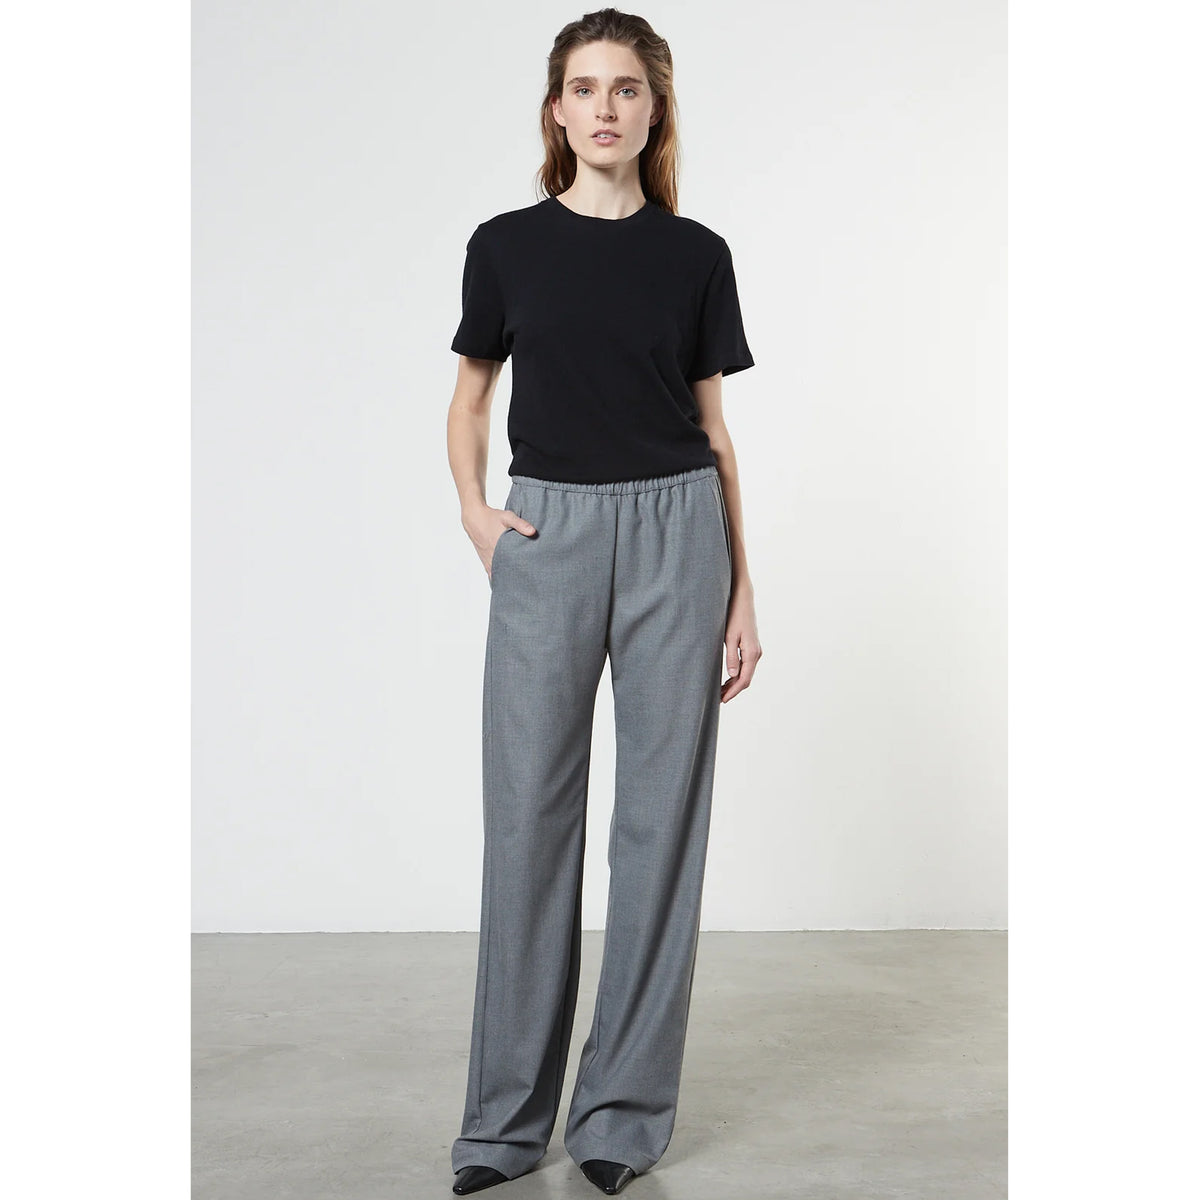 Enza Costa Everywhere Suit Pant in Light Grey